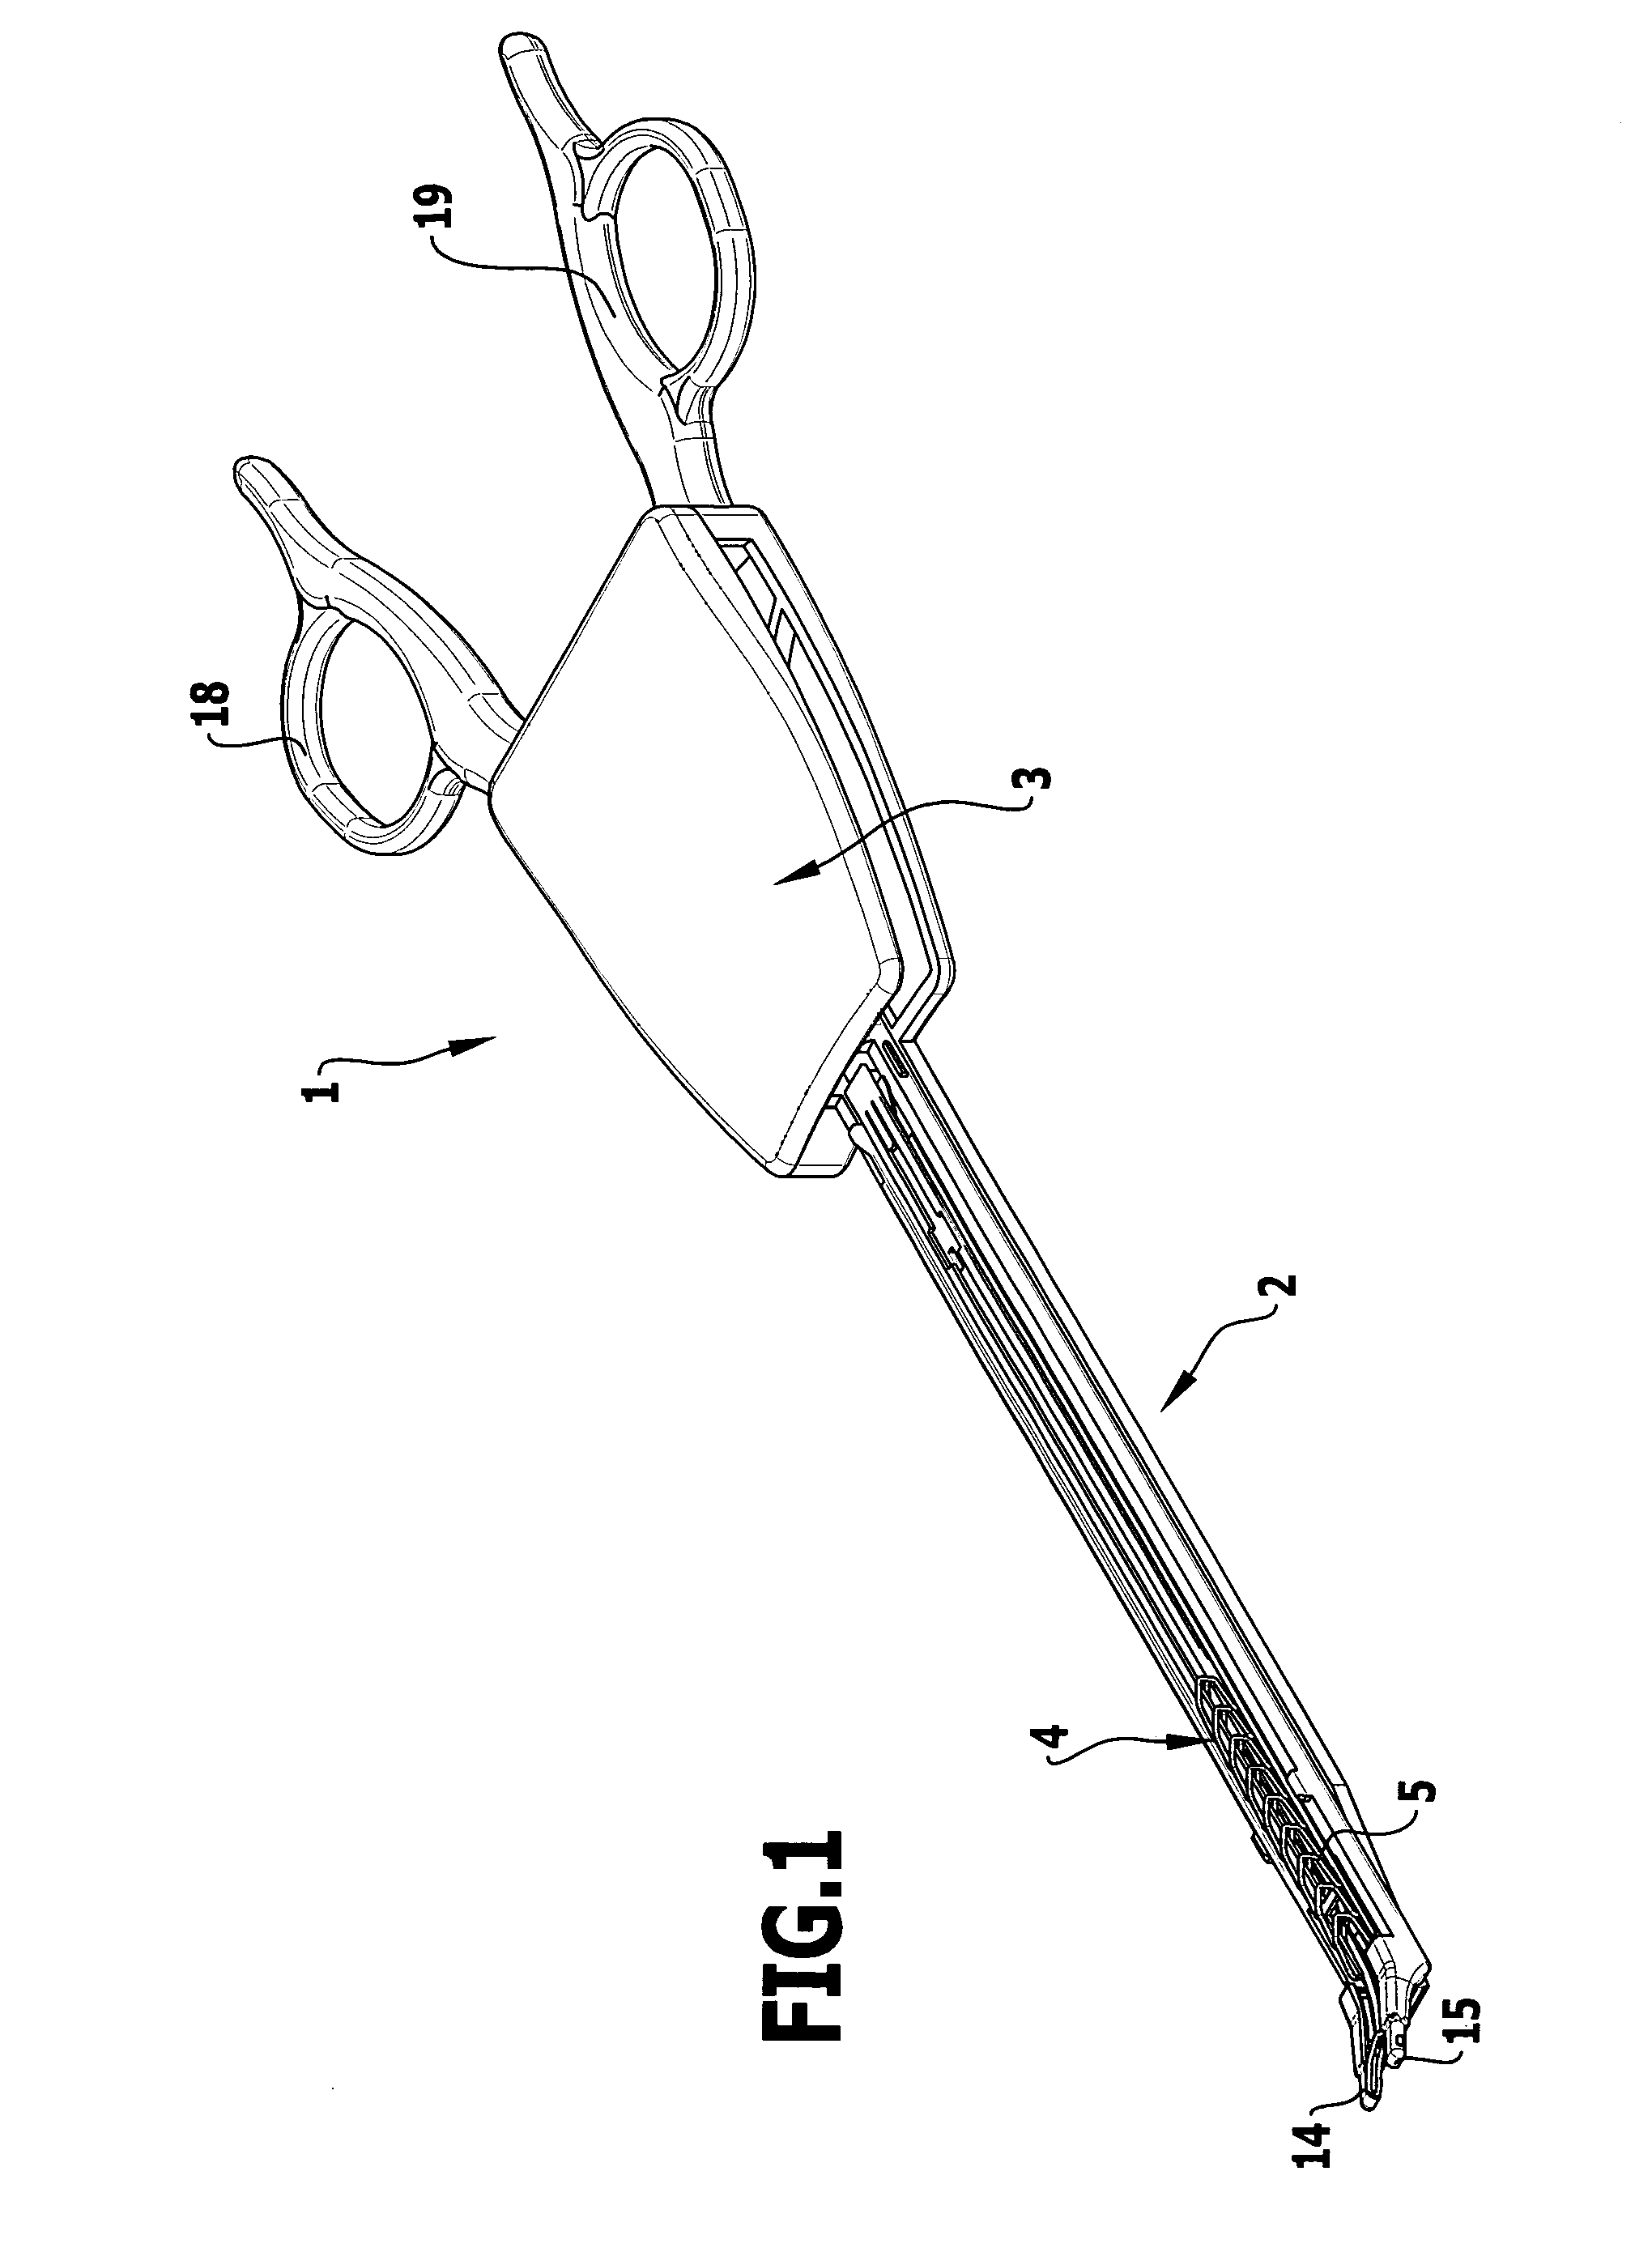 Surgical instrument for applying ligating clips